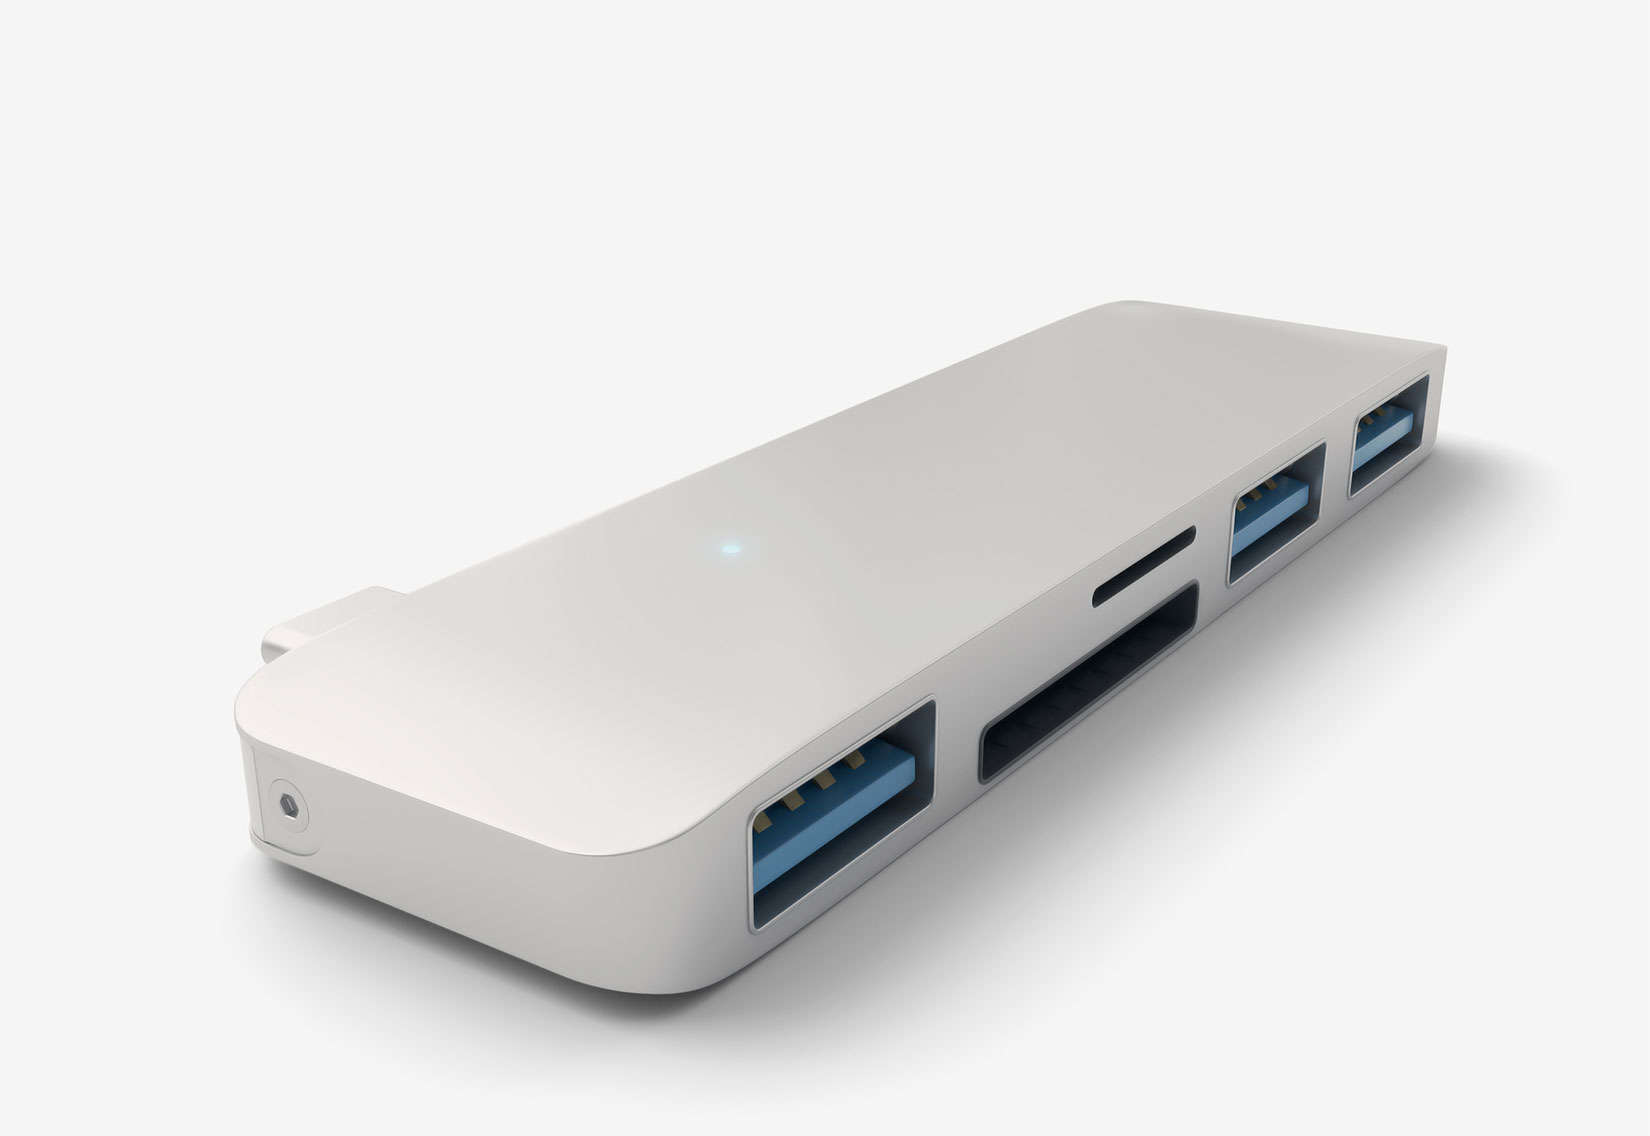 Recommend a usb hub for mac